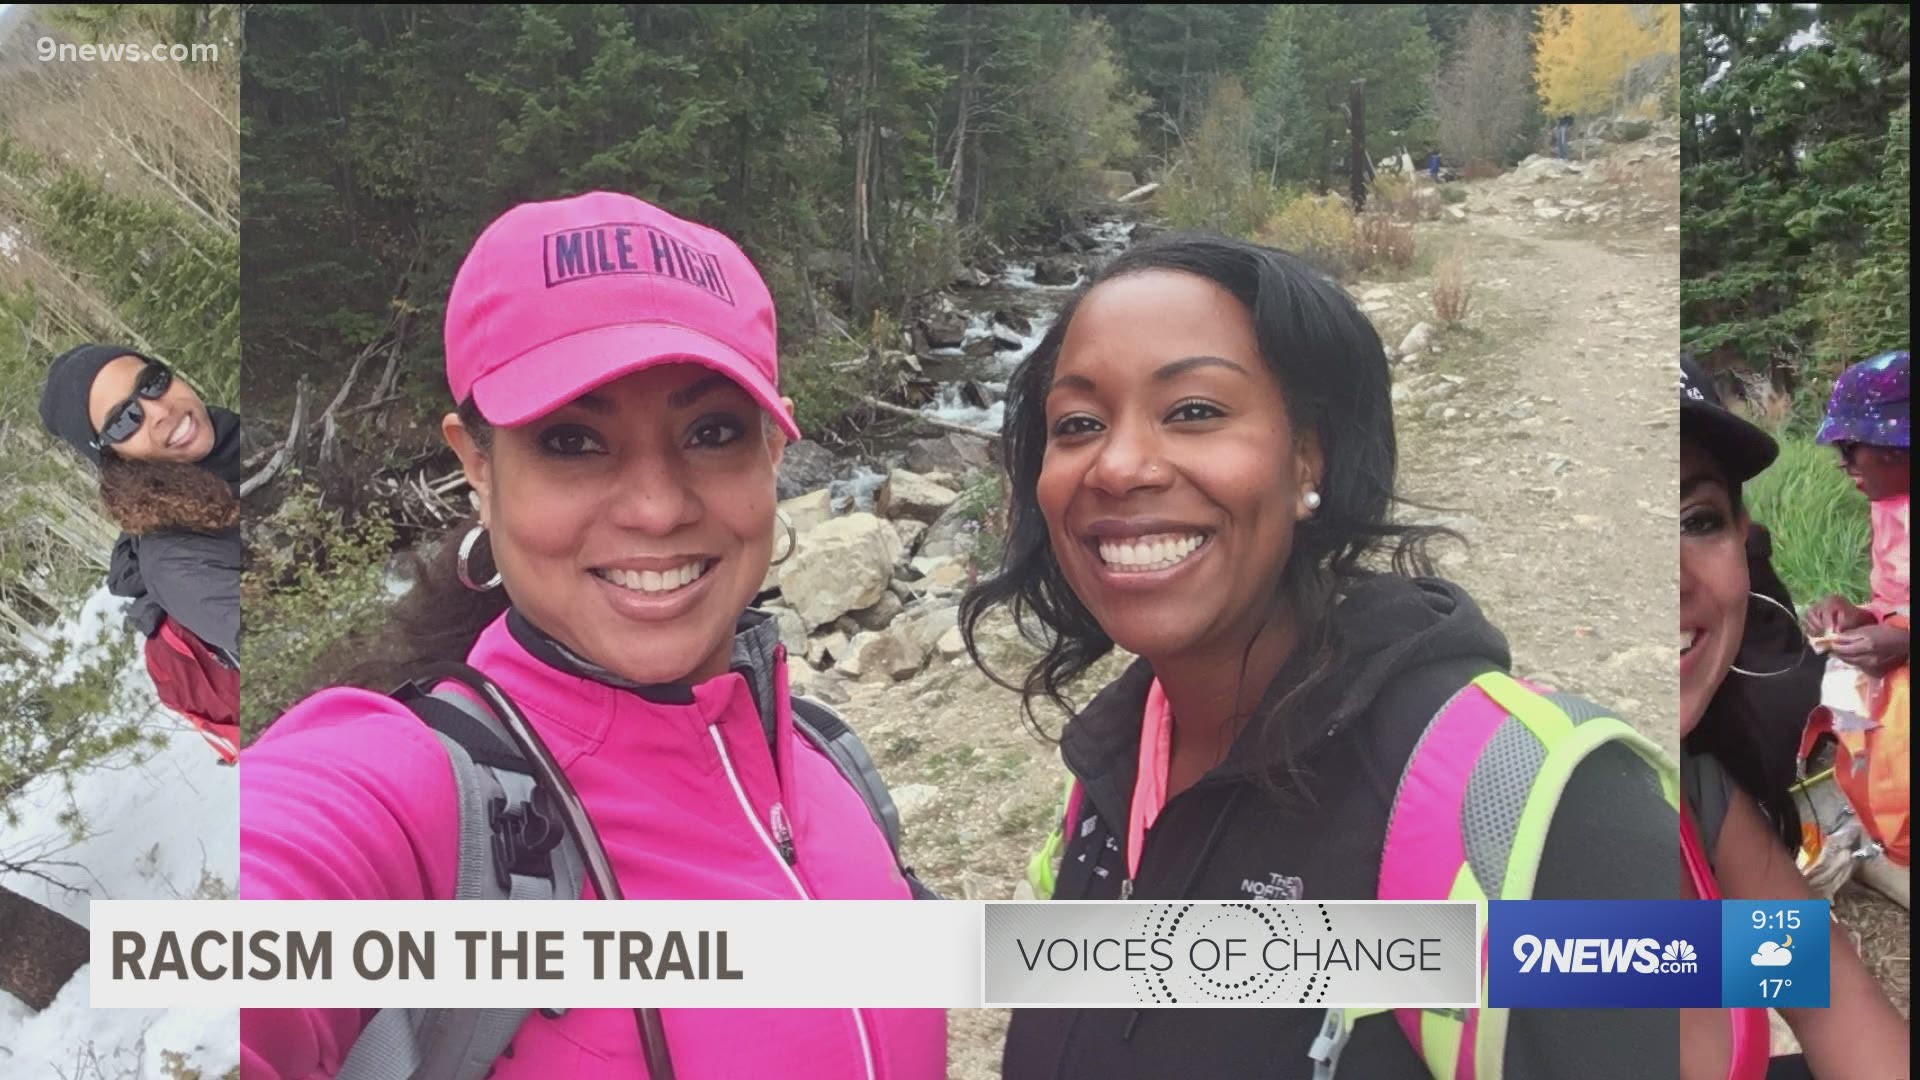 These women hike to release and unwind like everyone else. They also hike eradicate racial barriers and perception in the great outdoors.